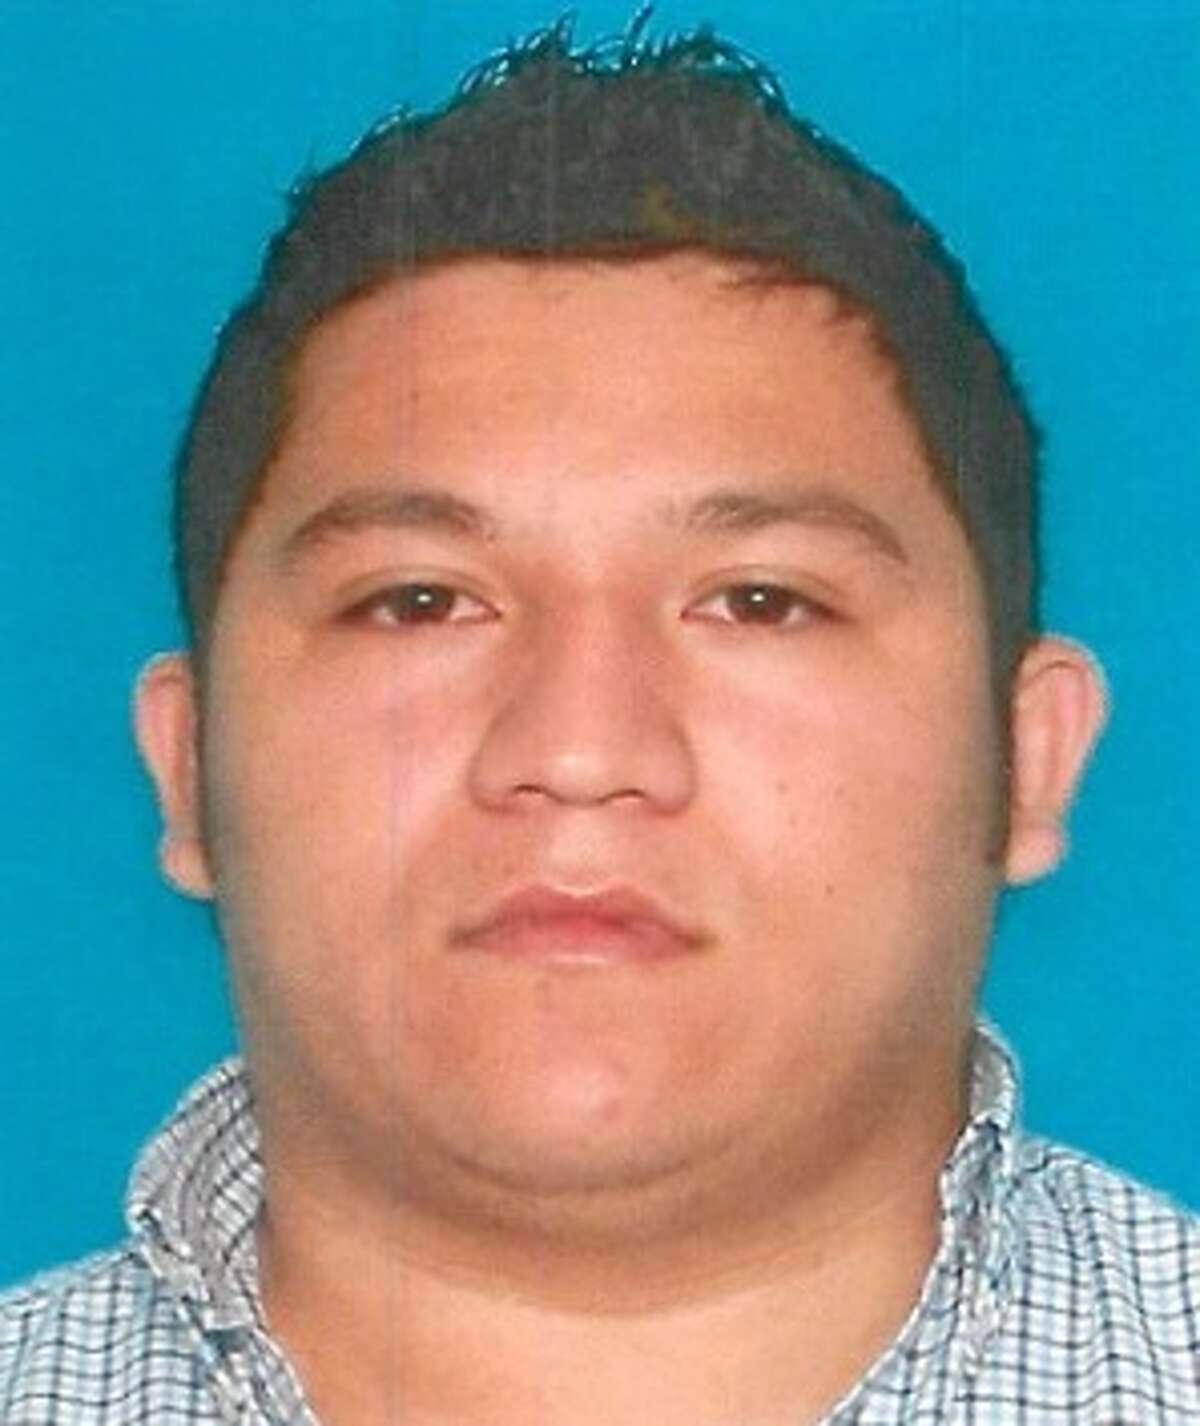 Allan Ramirez Rodriguez, 27, of Brownsville, has been named as the scheme's ringleader. He is wanted on three counts of theft of property, three counts of engaging in organized criminal activity and one count of secure execution document by deception.